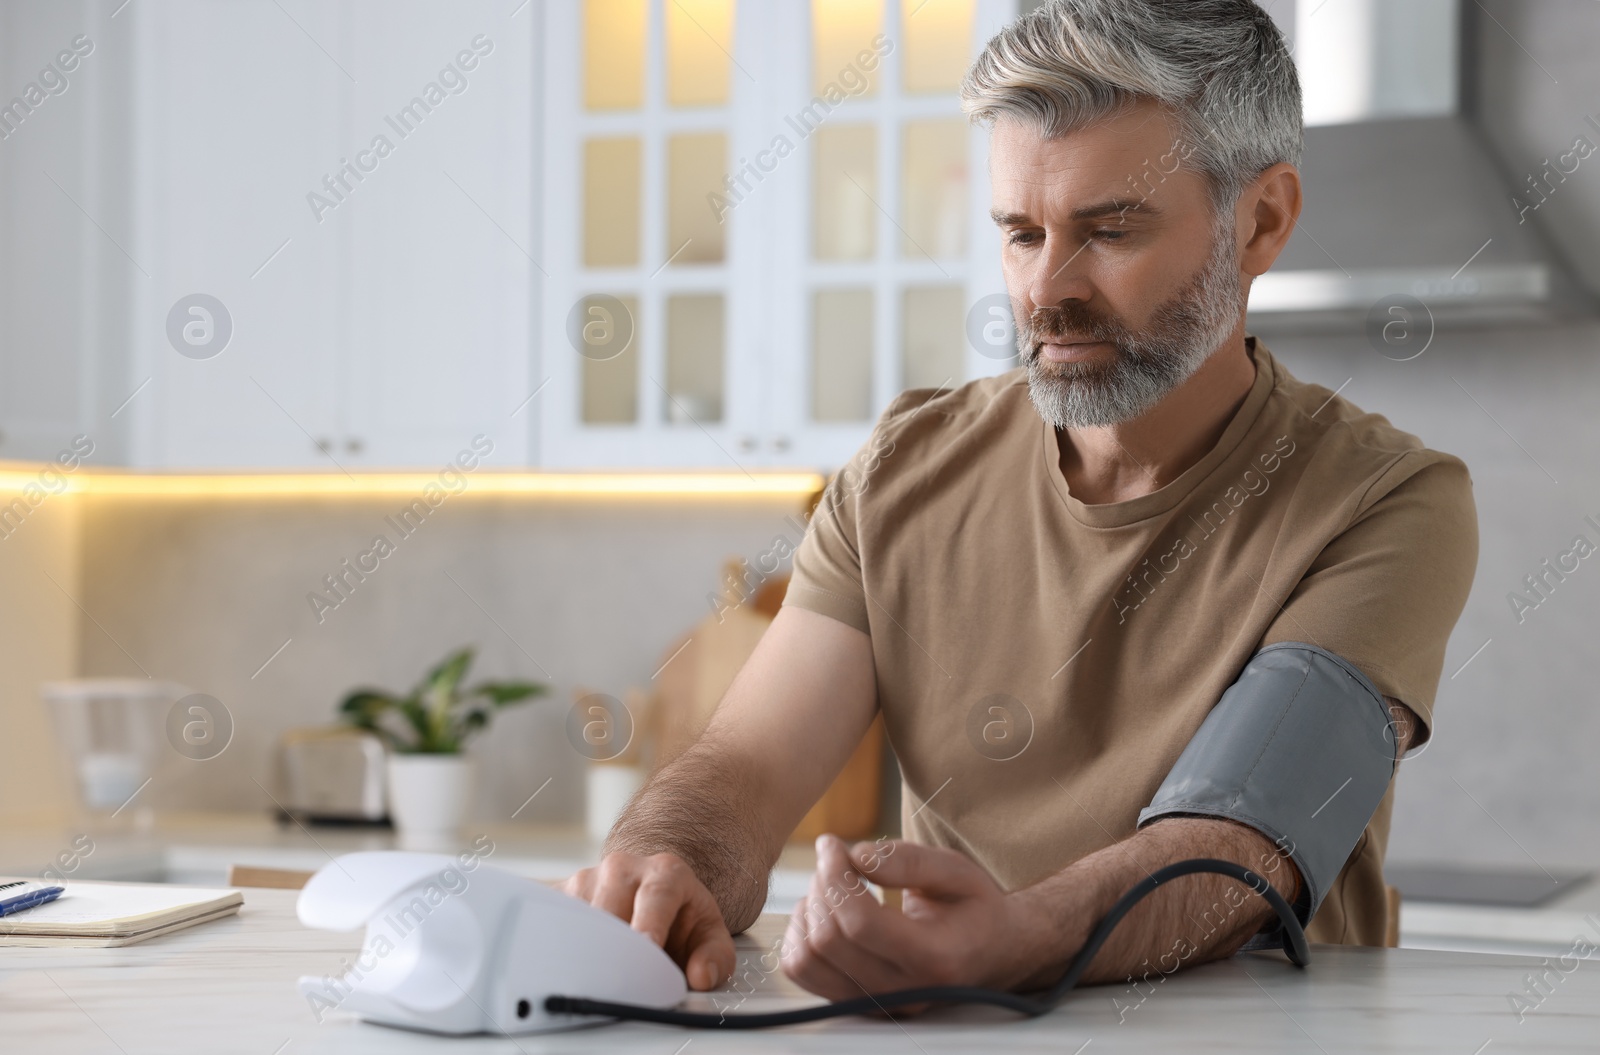 Photo of Man measuring blood pressure at table indoors